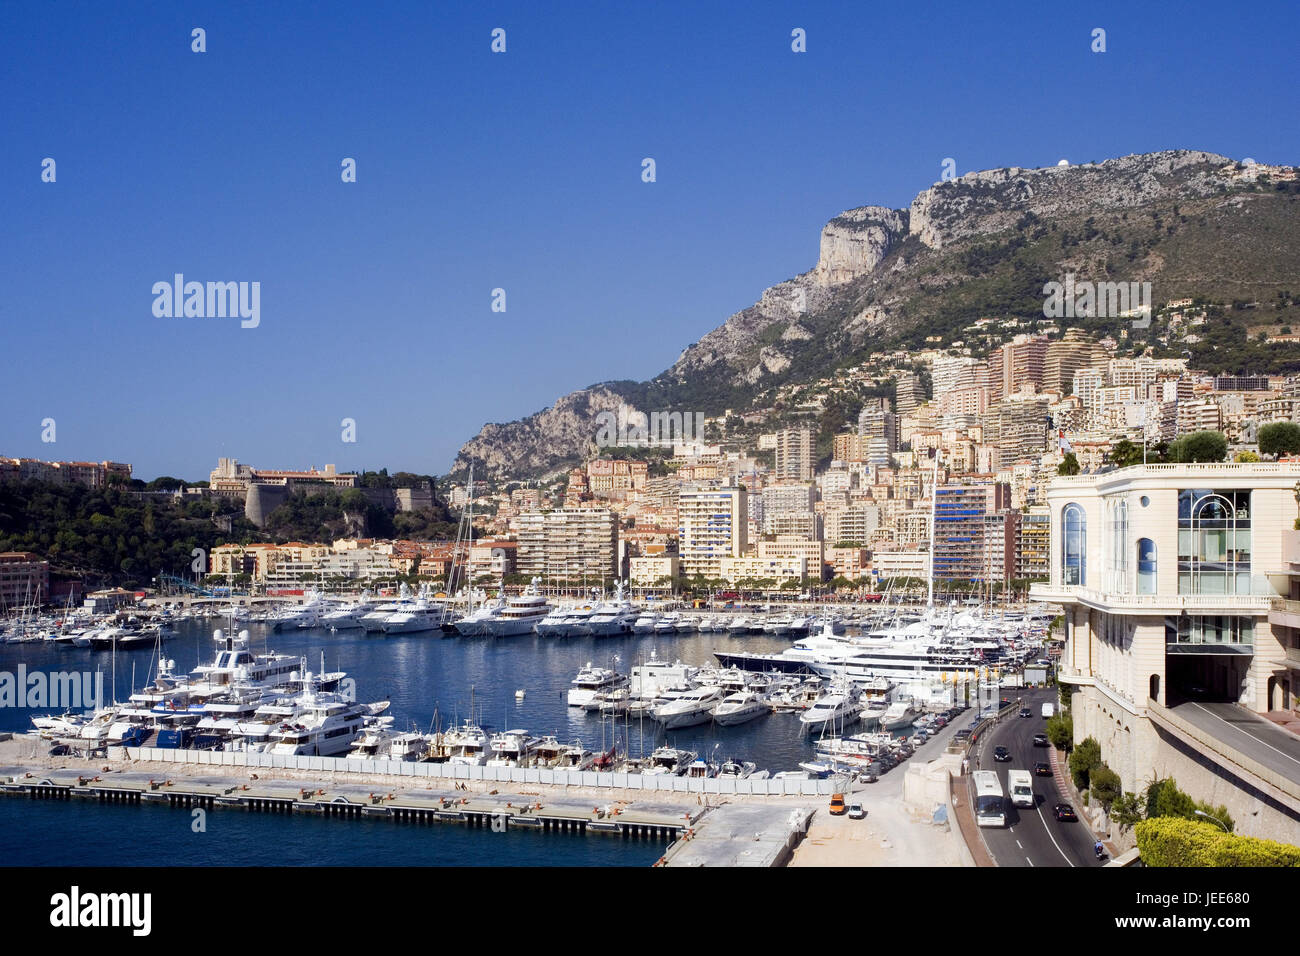 Monaco, Monte Carlo, town view, harbour, the Mediterranean Sea, principality, Riviera, Mediterranean coast, houses, residential houses, harbour basins, yacht harbour, yachts, boats, ships, wealth, luxury, jet set, tax haven, destination, tourism, Stock Photo